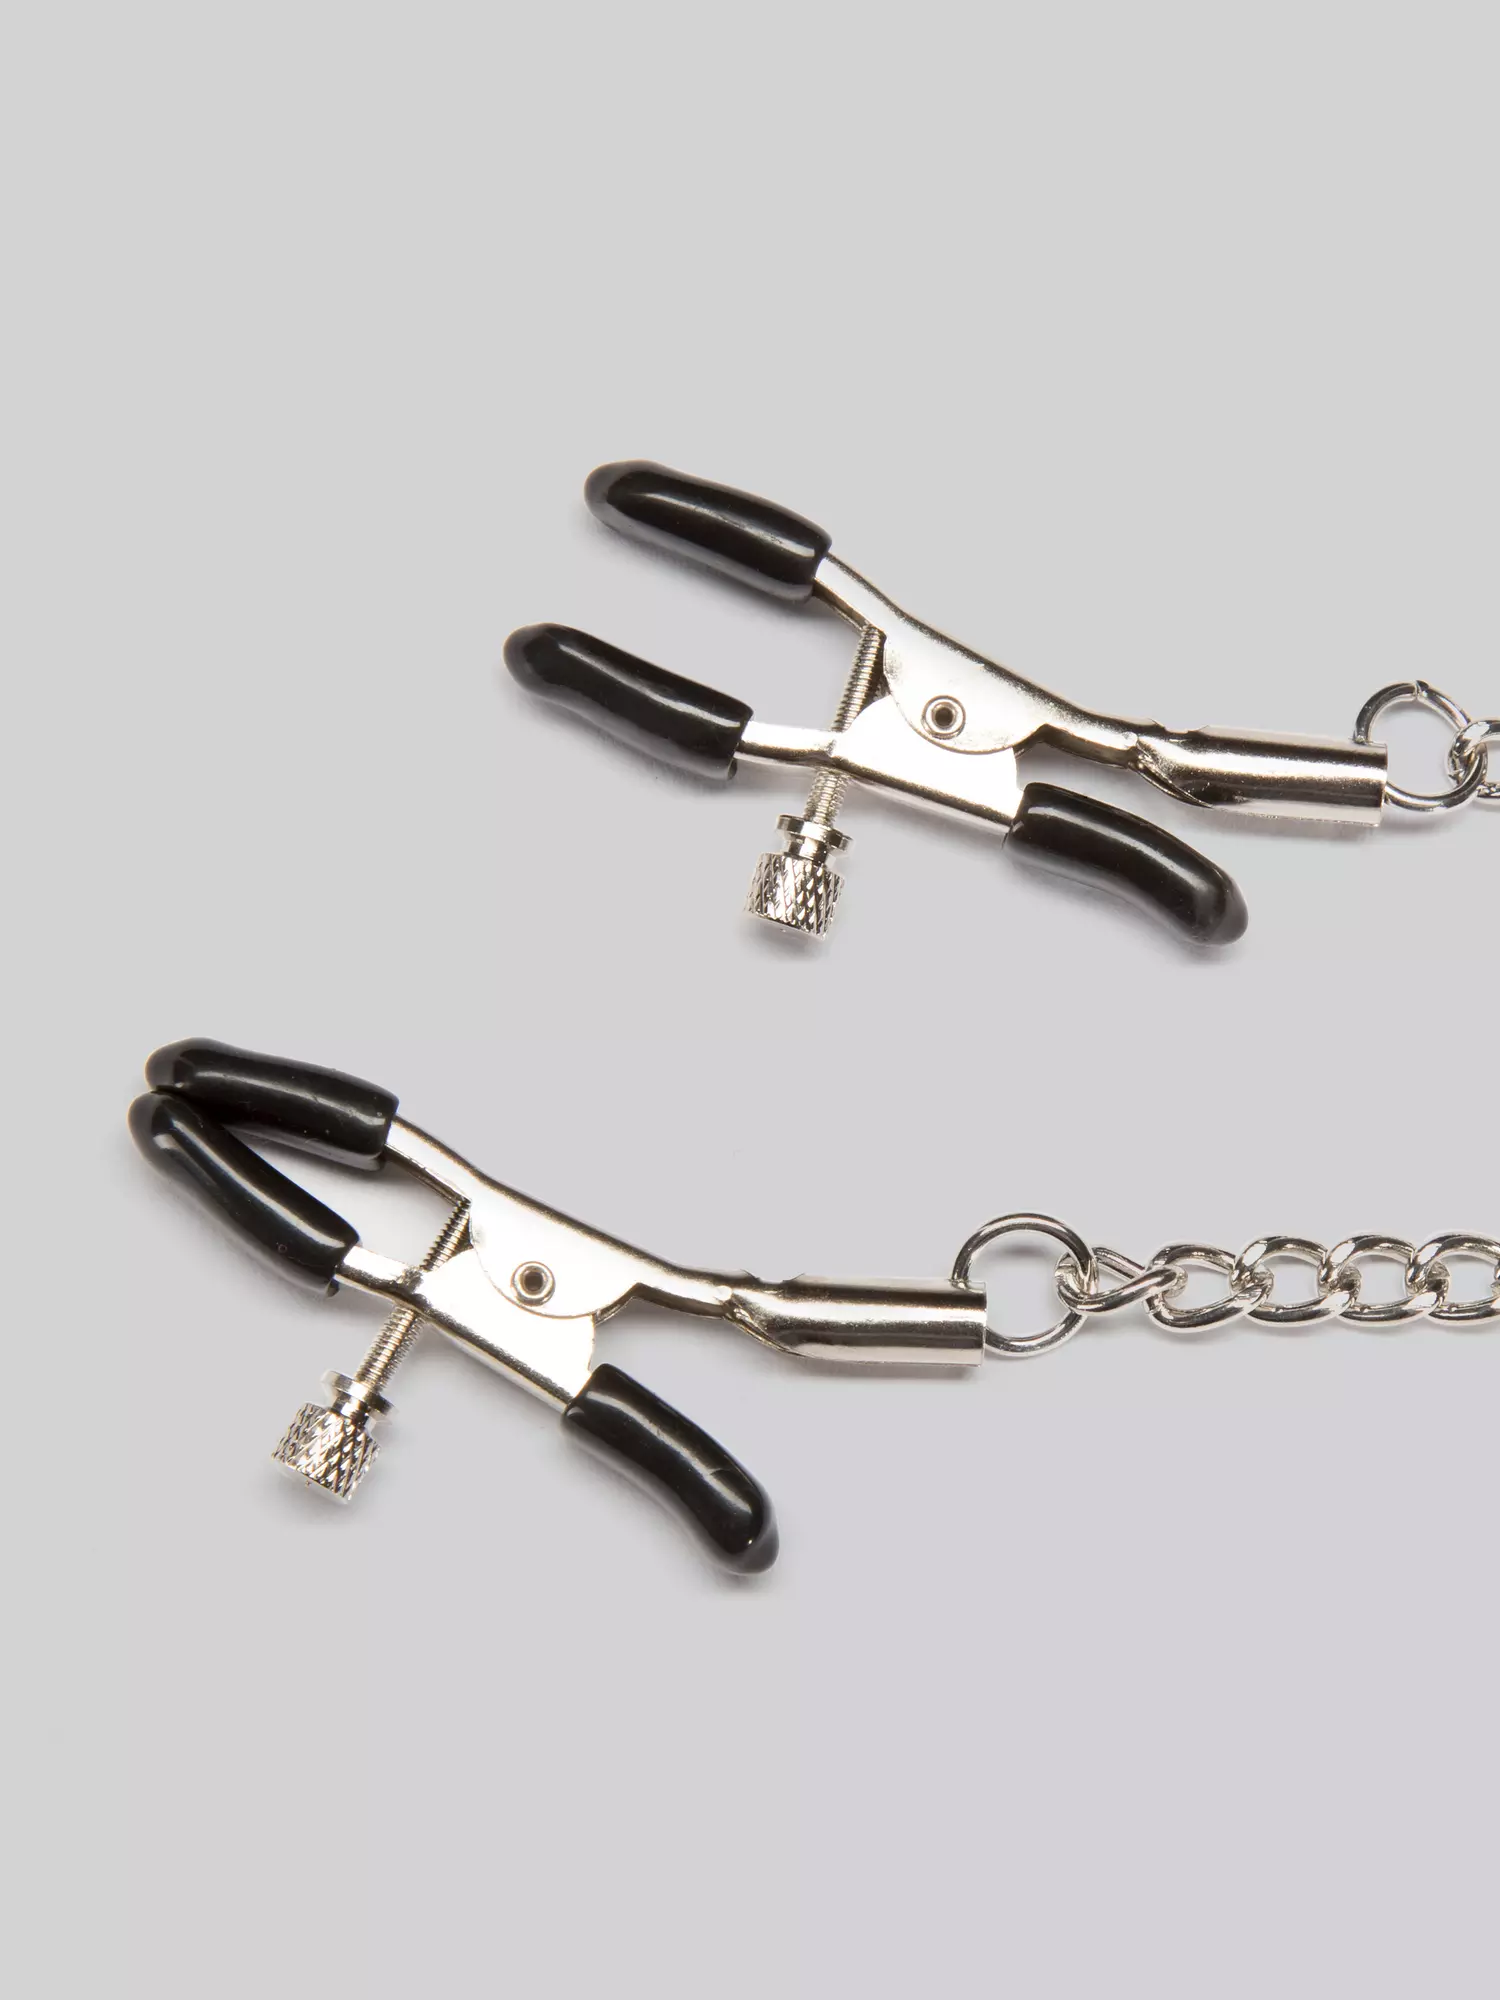 Bondage Boutique Adjustable Nipple Clamps and Clit Clamp. Slide 3